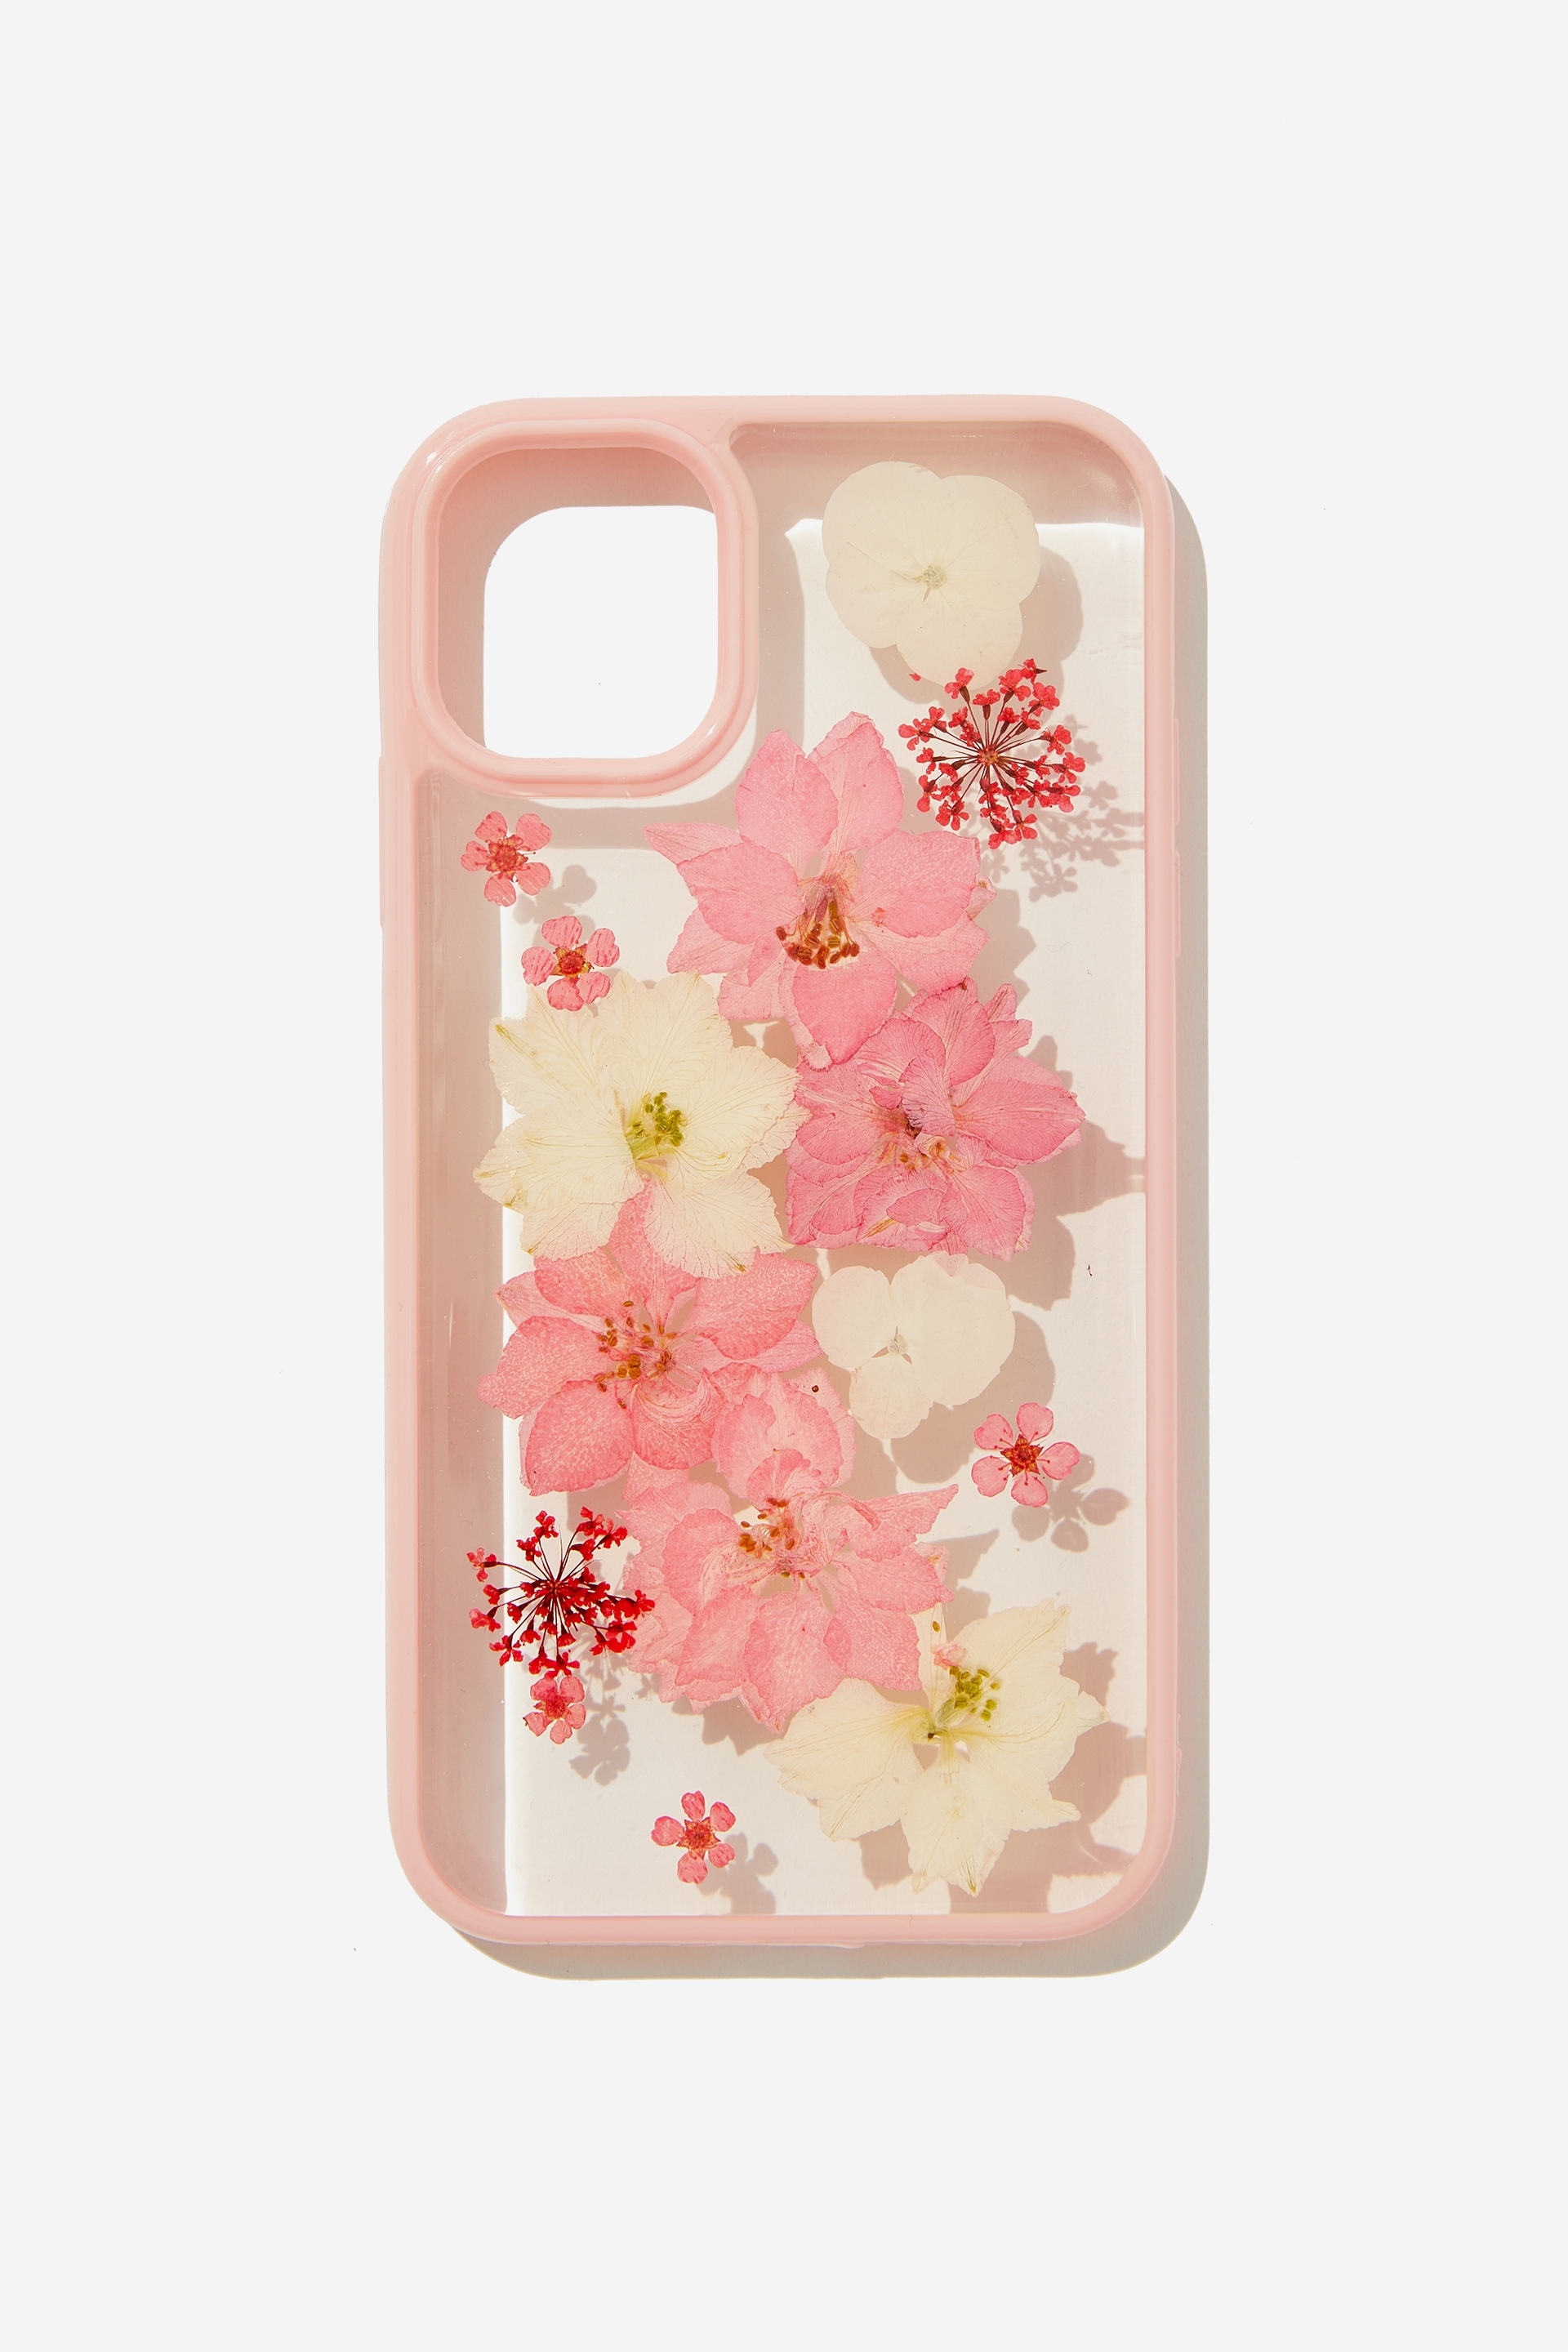 Typo - Protective Phone Case iPhone 11 - Trapped garden flowers / pink